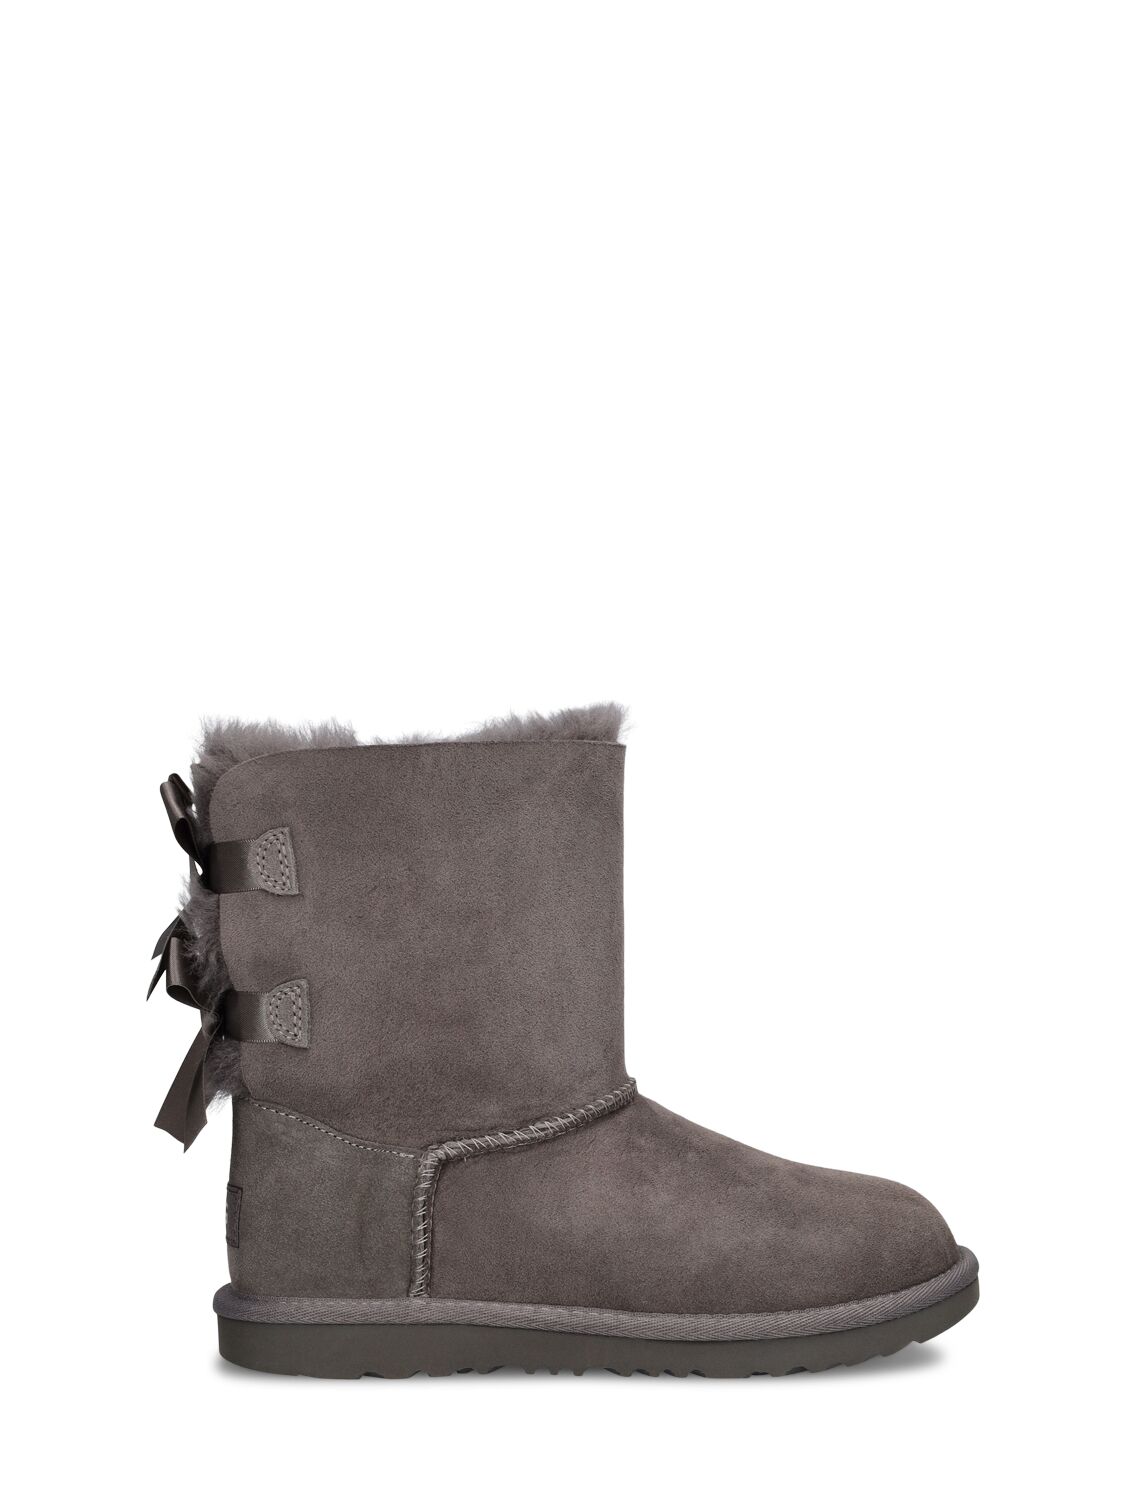 Ugg Kids' Girls' Bailey Bow Ii Shearling Boots - Toddler In Gray